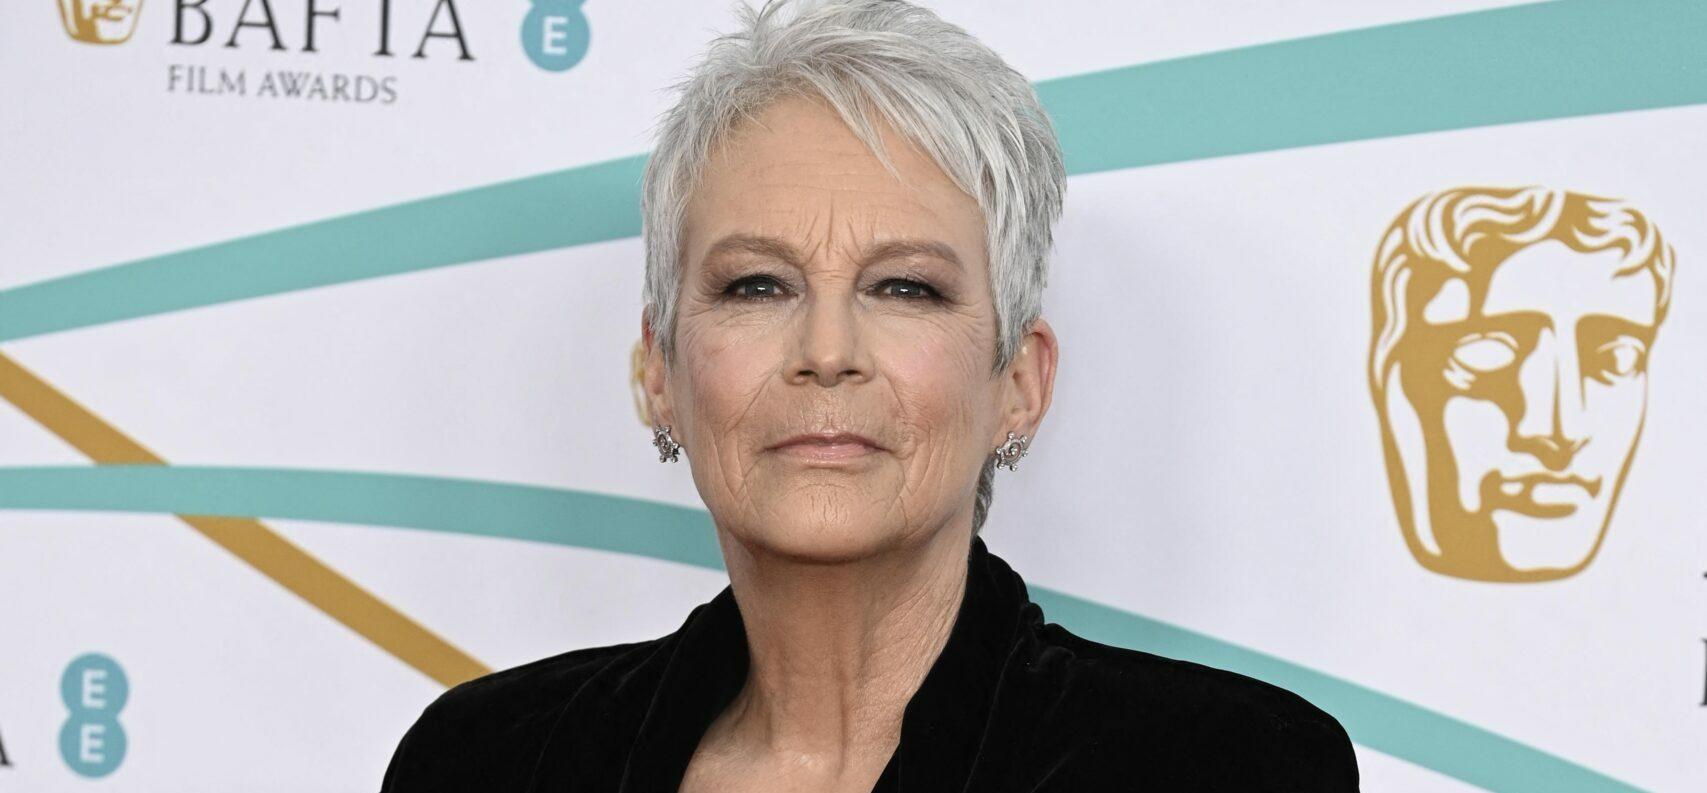 Jamie Lee Curtis' kiss with Michelle Yeoh is a pop culture moment